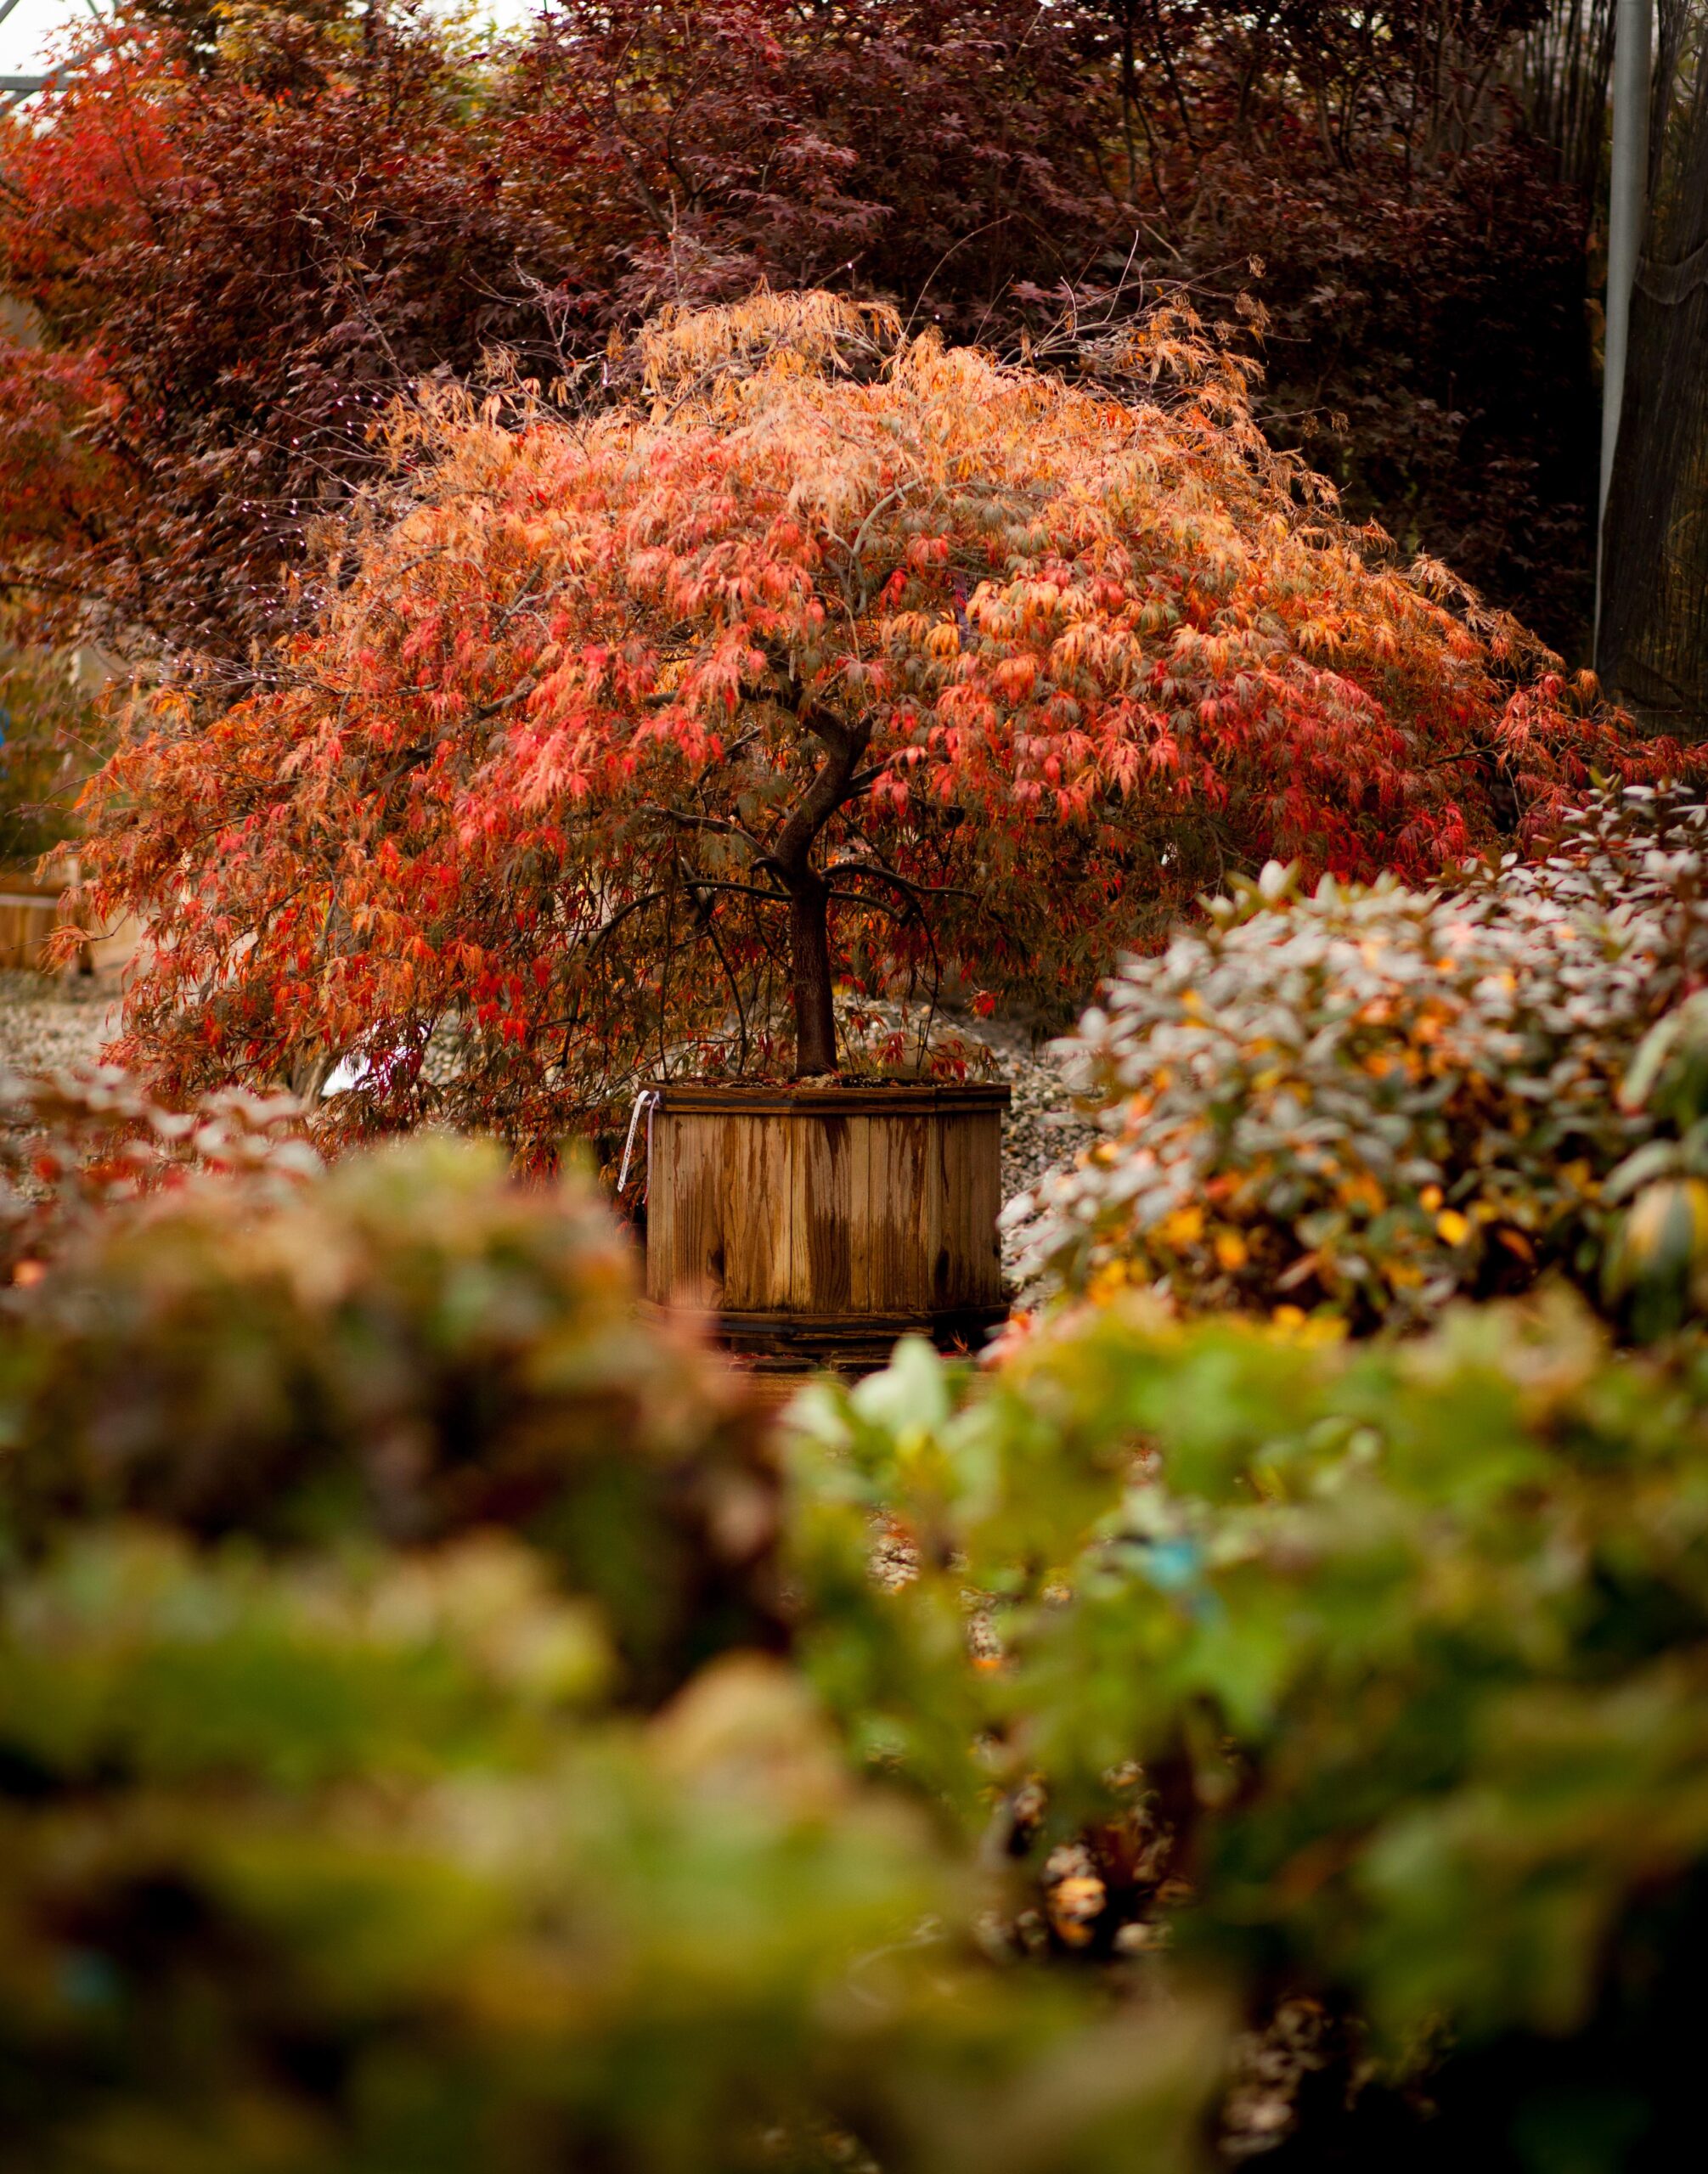 red and orange Japanese Maple tree in a wooden container surrounded by blurred trees and shrubs